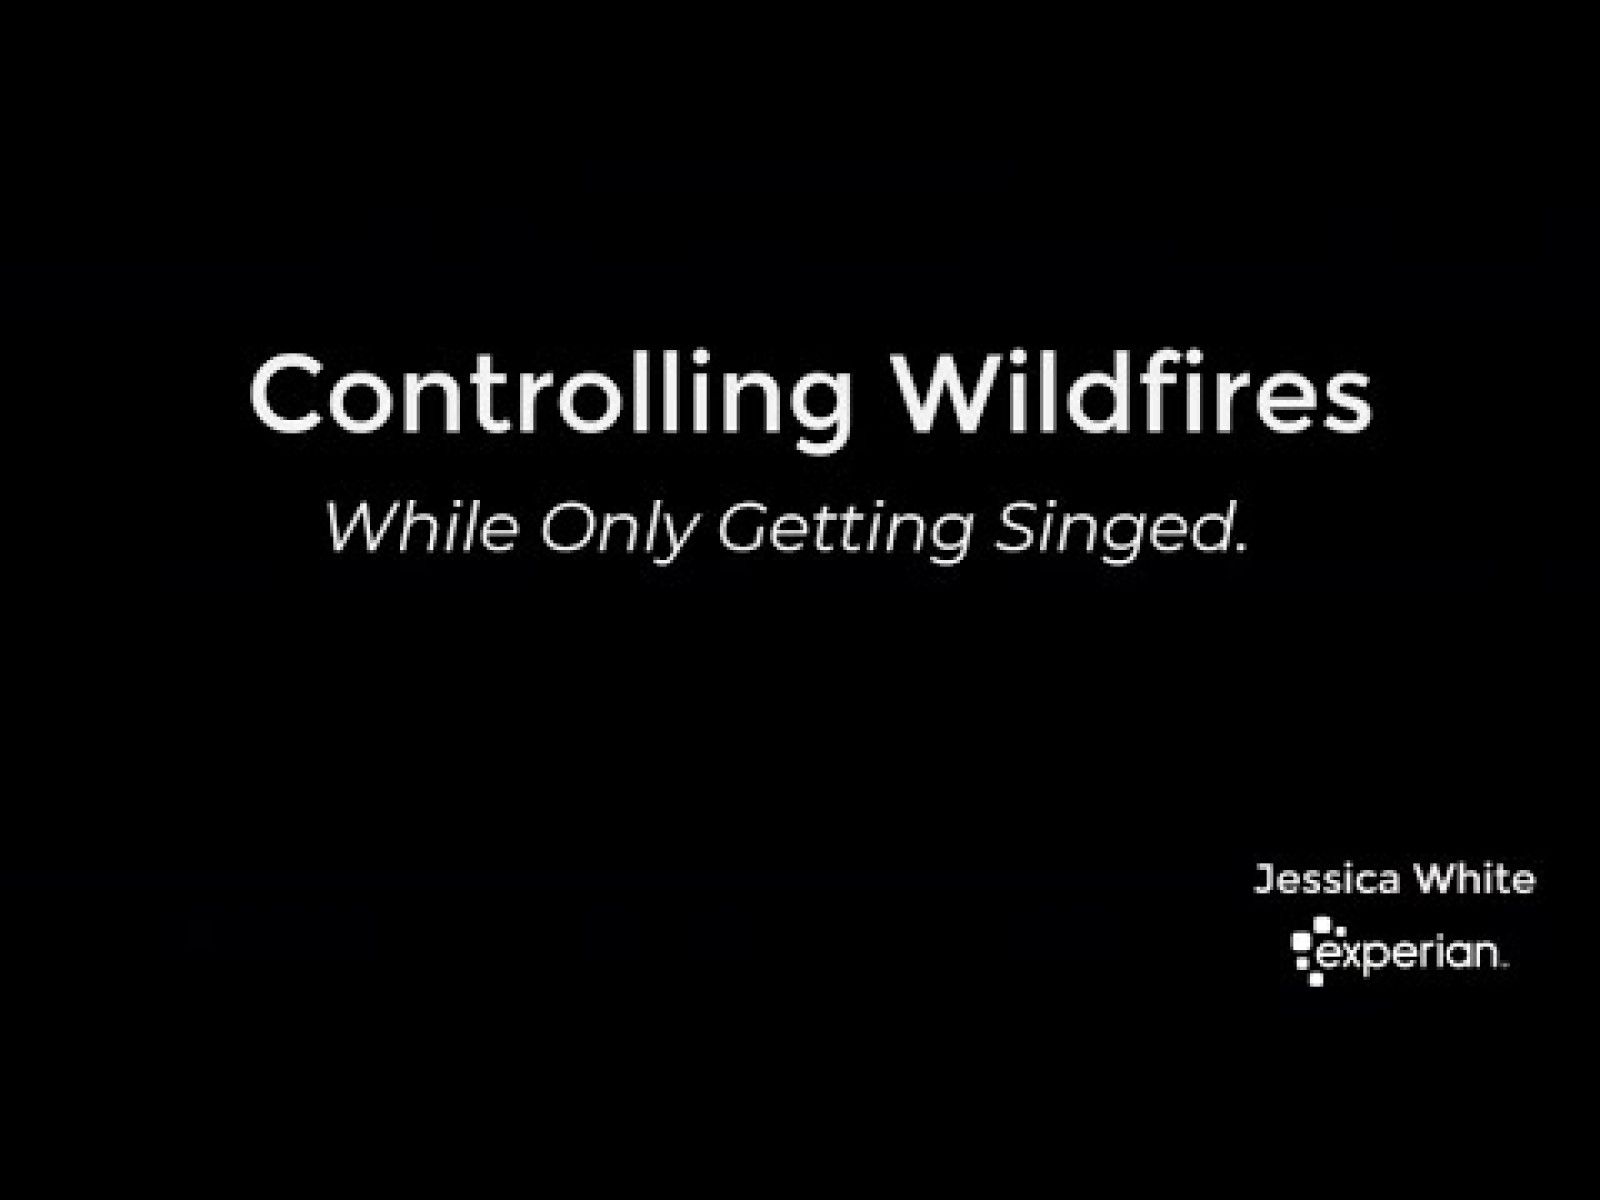 Controlling Wildfires (While Only Getting Singed).